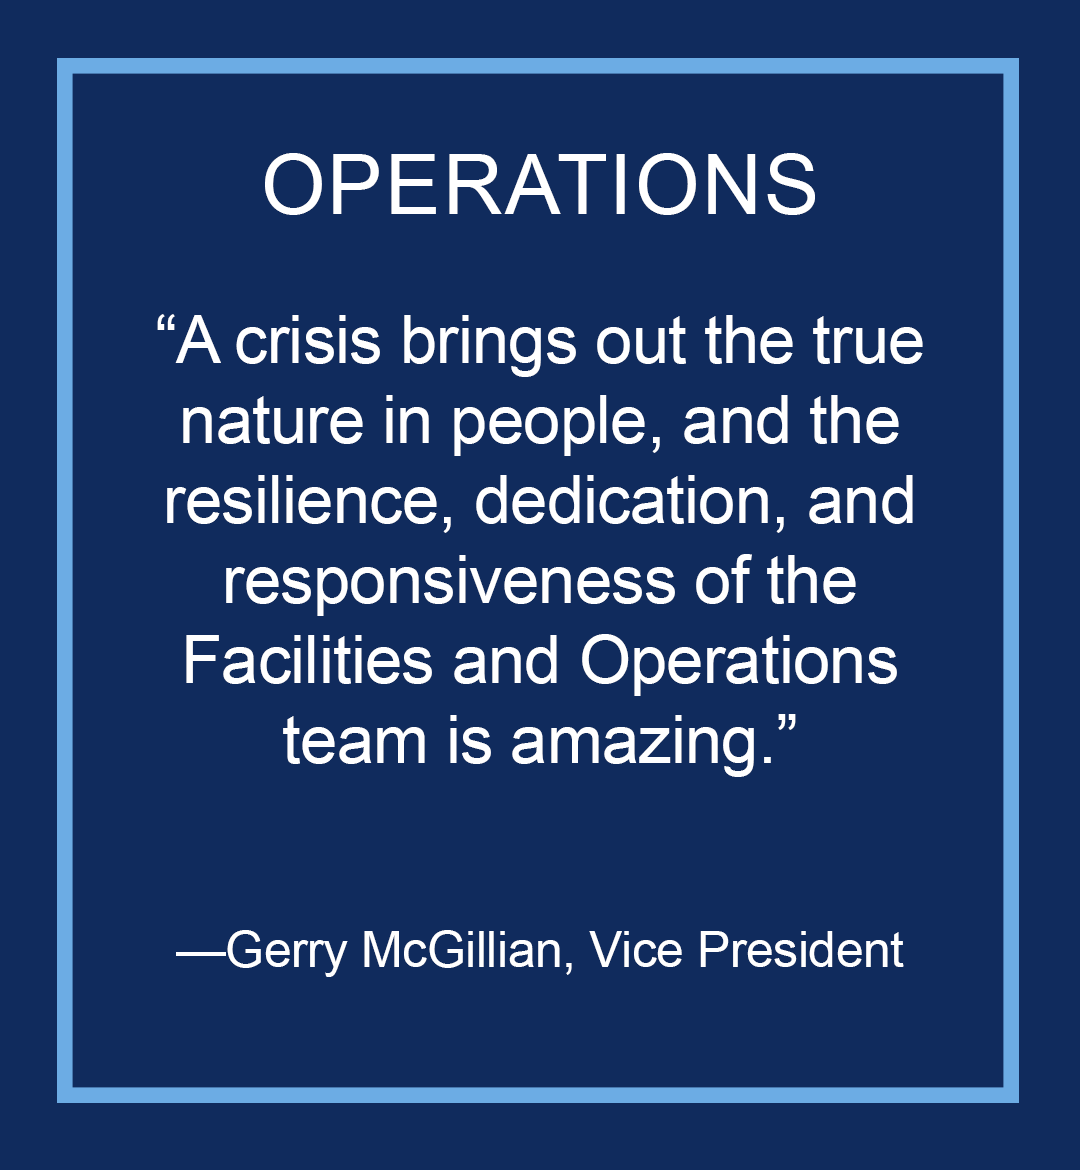 Image with text: Operations, "A crisis brings out the true nature of people, and the resilience, dedication, and responsiveness of the Facilities Operations team is amazing," Gerry McGillian, Vice President